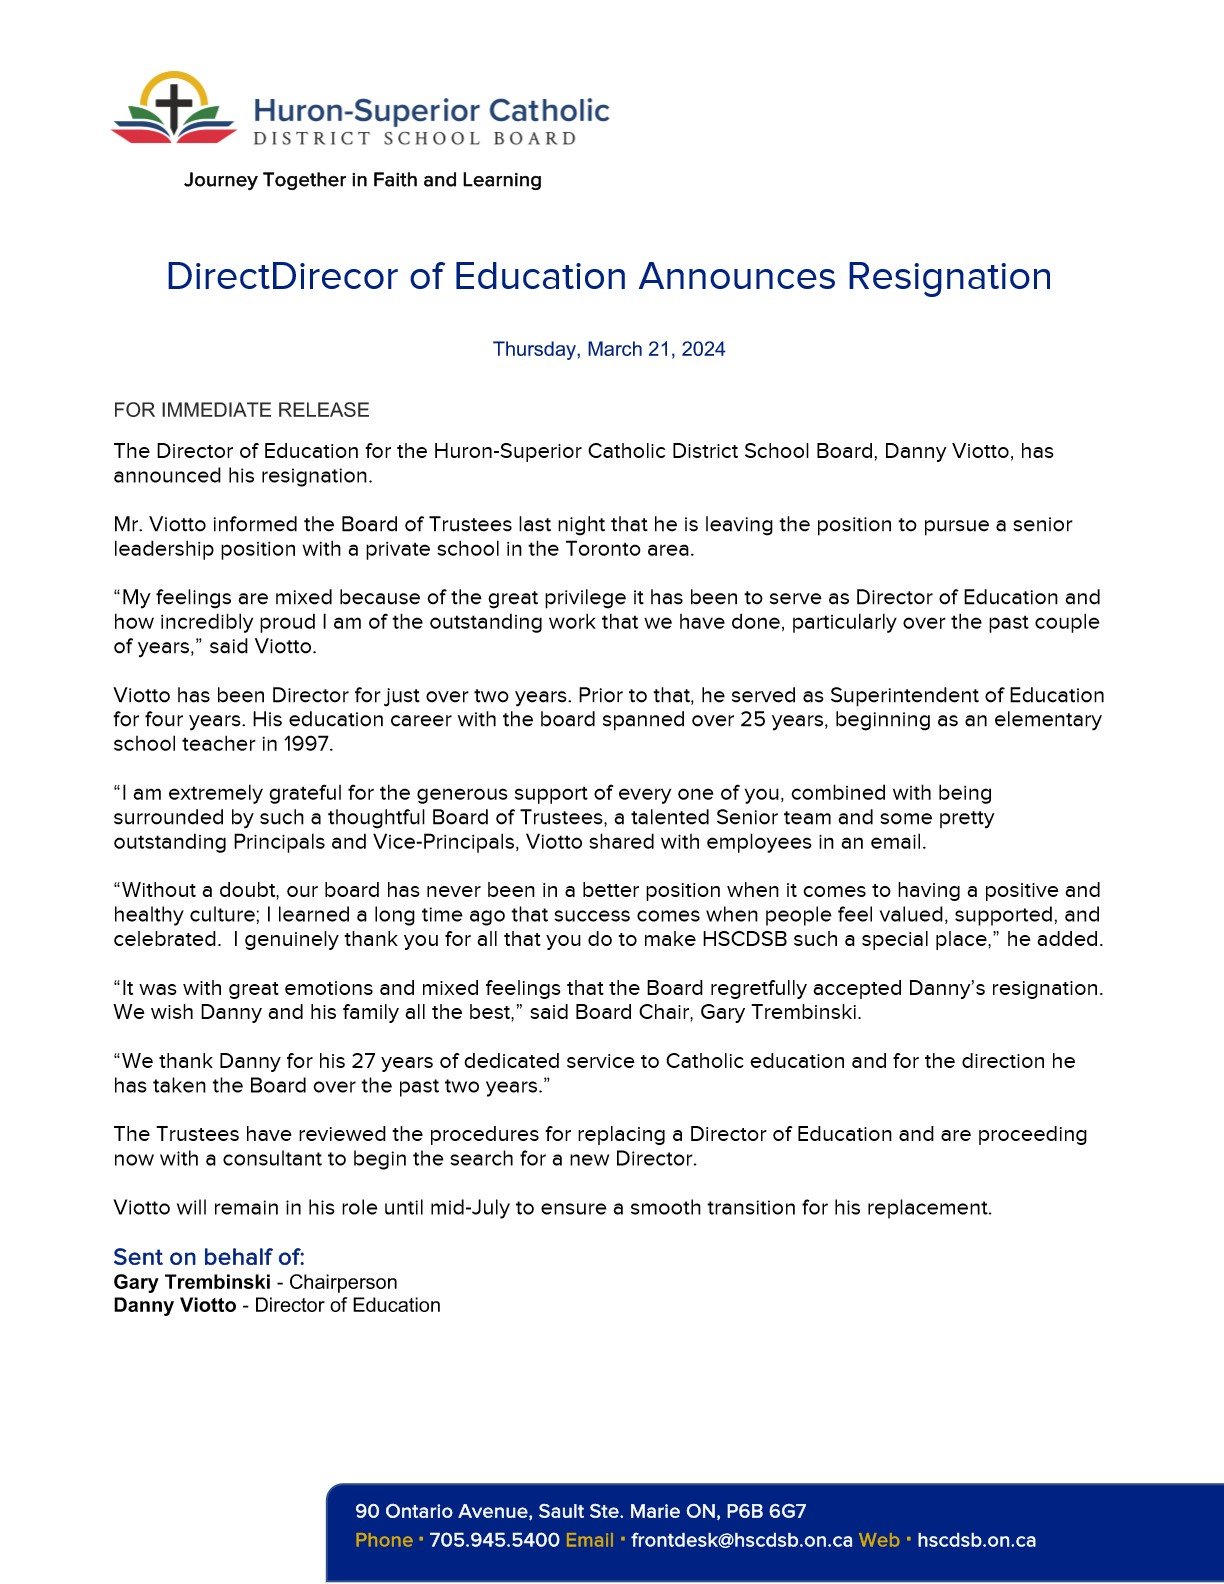 HSCDSB Release Director of Education Resigns_1.jpg